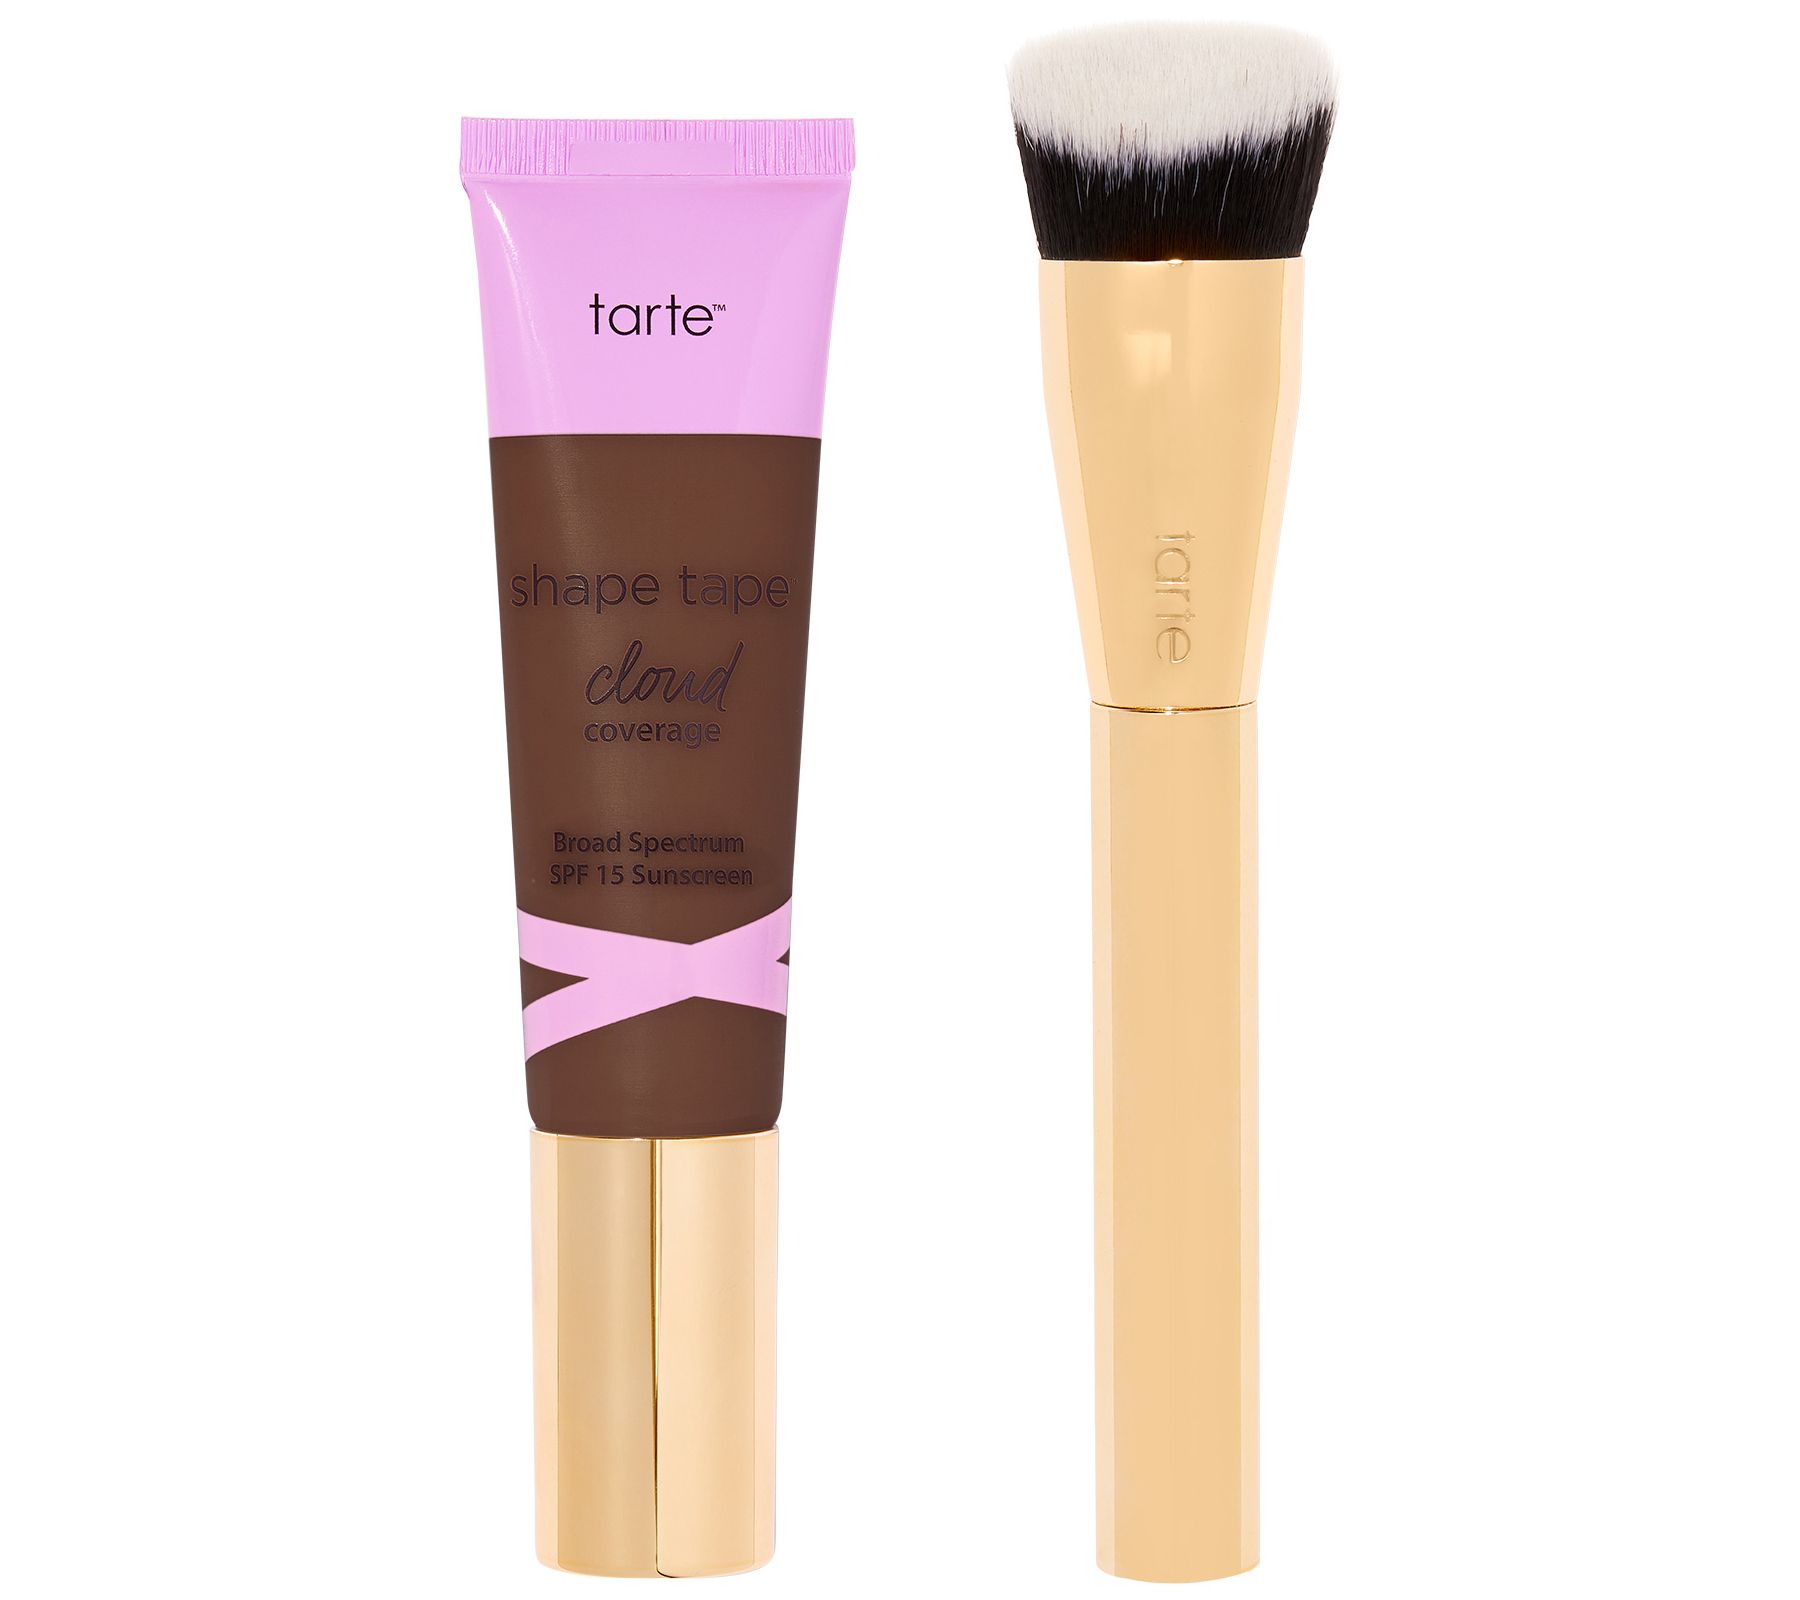 Tarte Shape Tape Cloud Coverage Foundation, SPF 15, 20B Light Beige  Ingredients and Reviews